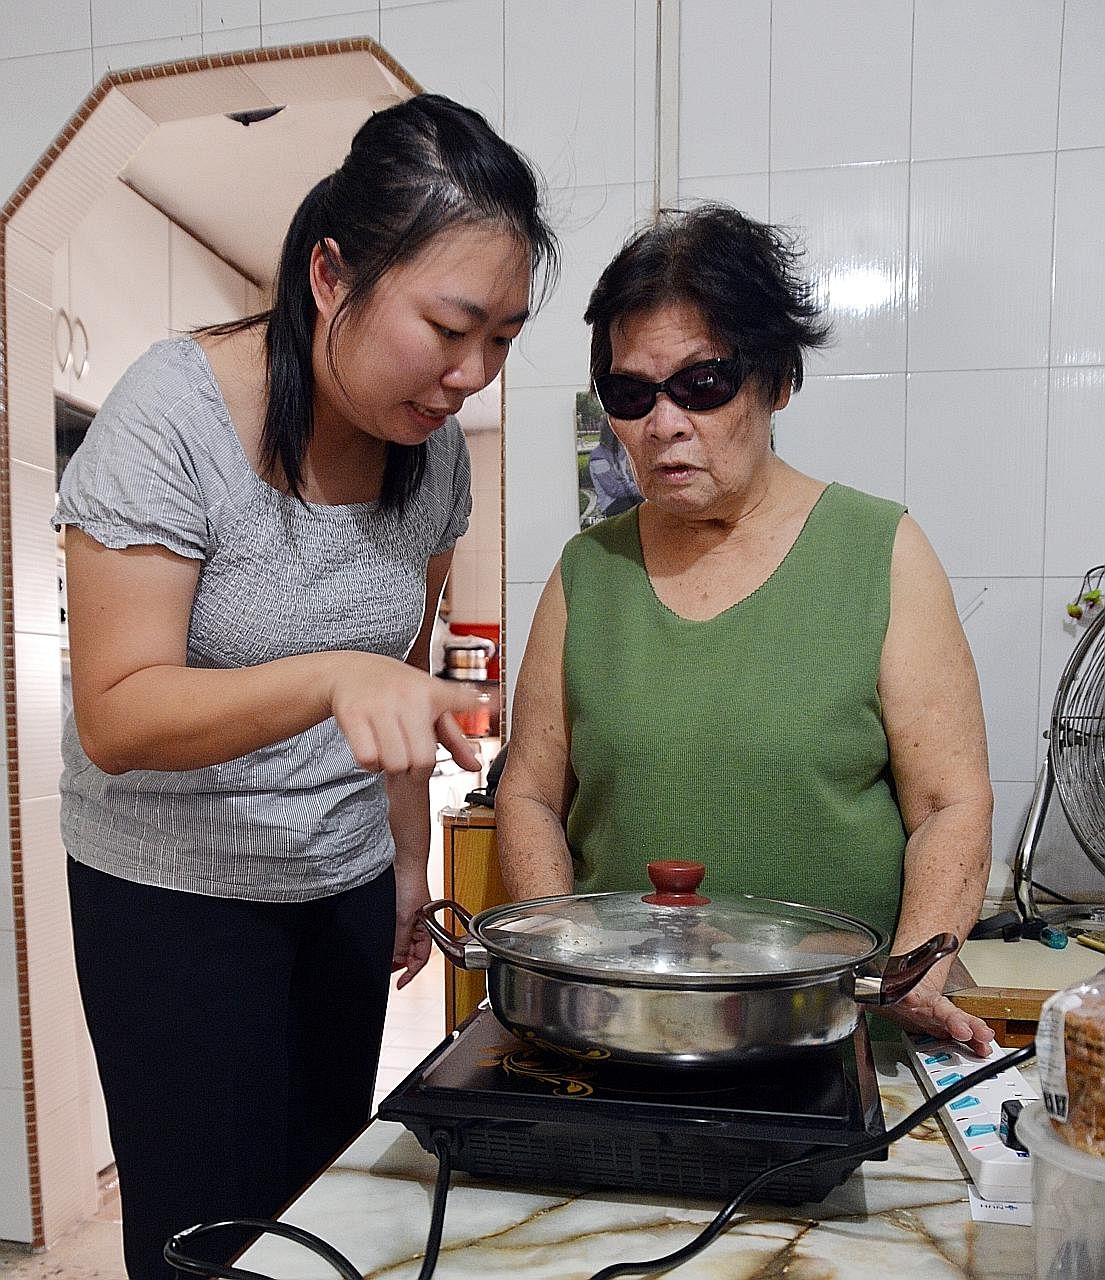 Senior occupational therapist Chen Xuanyu shows housewife Joy Leong how to cook food and boil water more safely. Madam Leong has total vision loss in one eye and partial vision in the other.